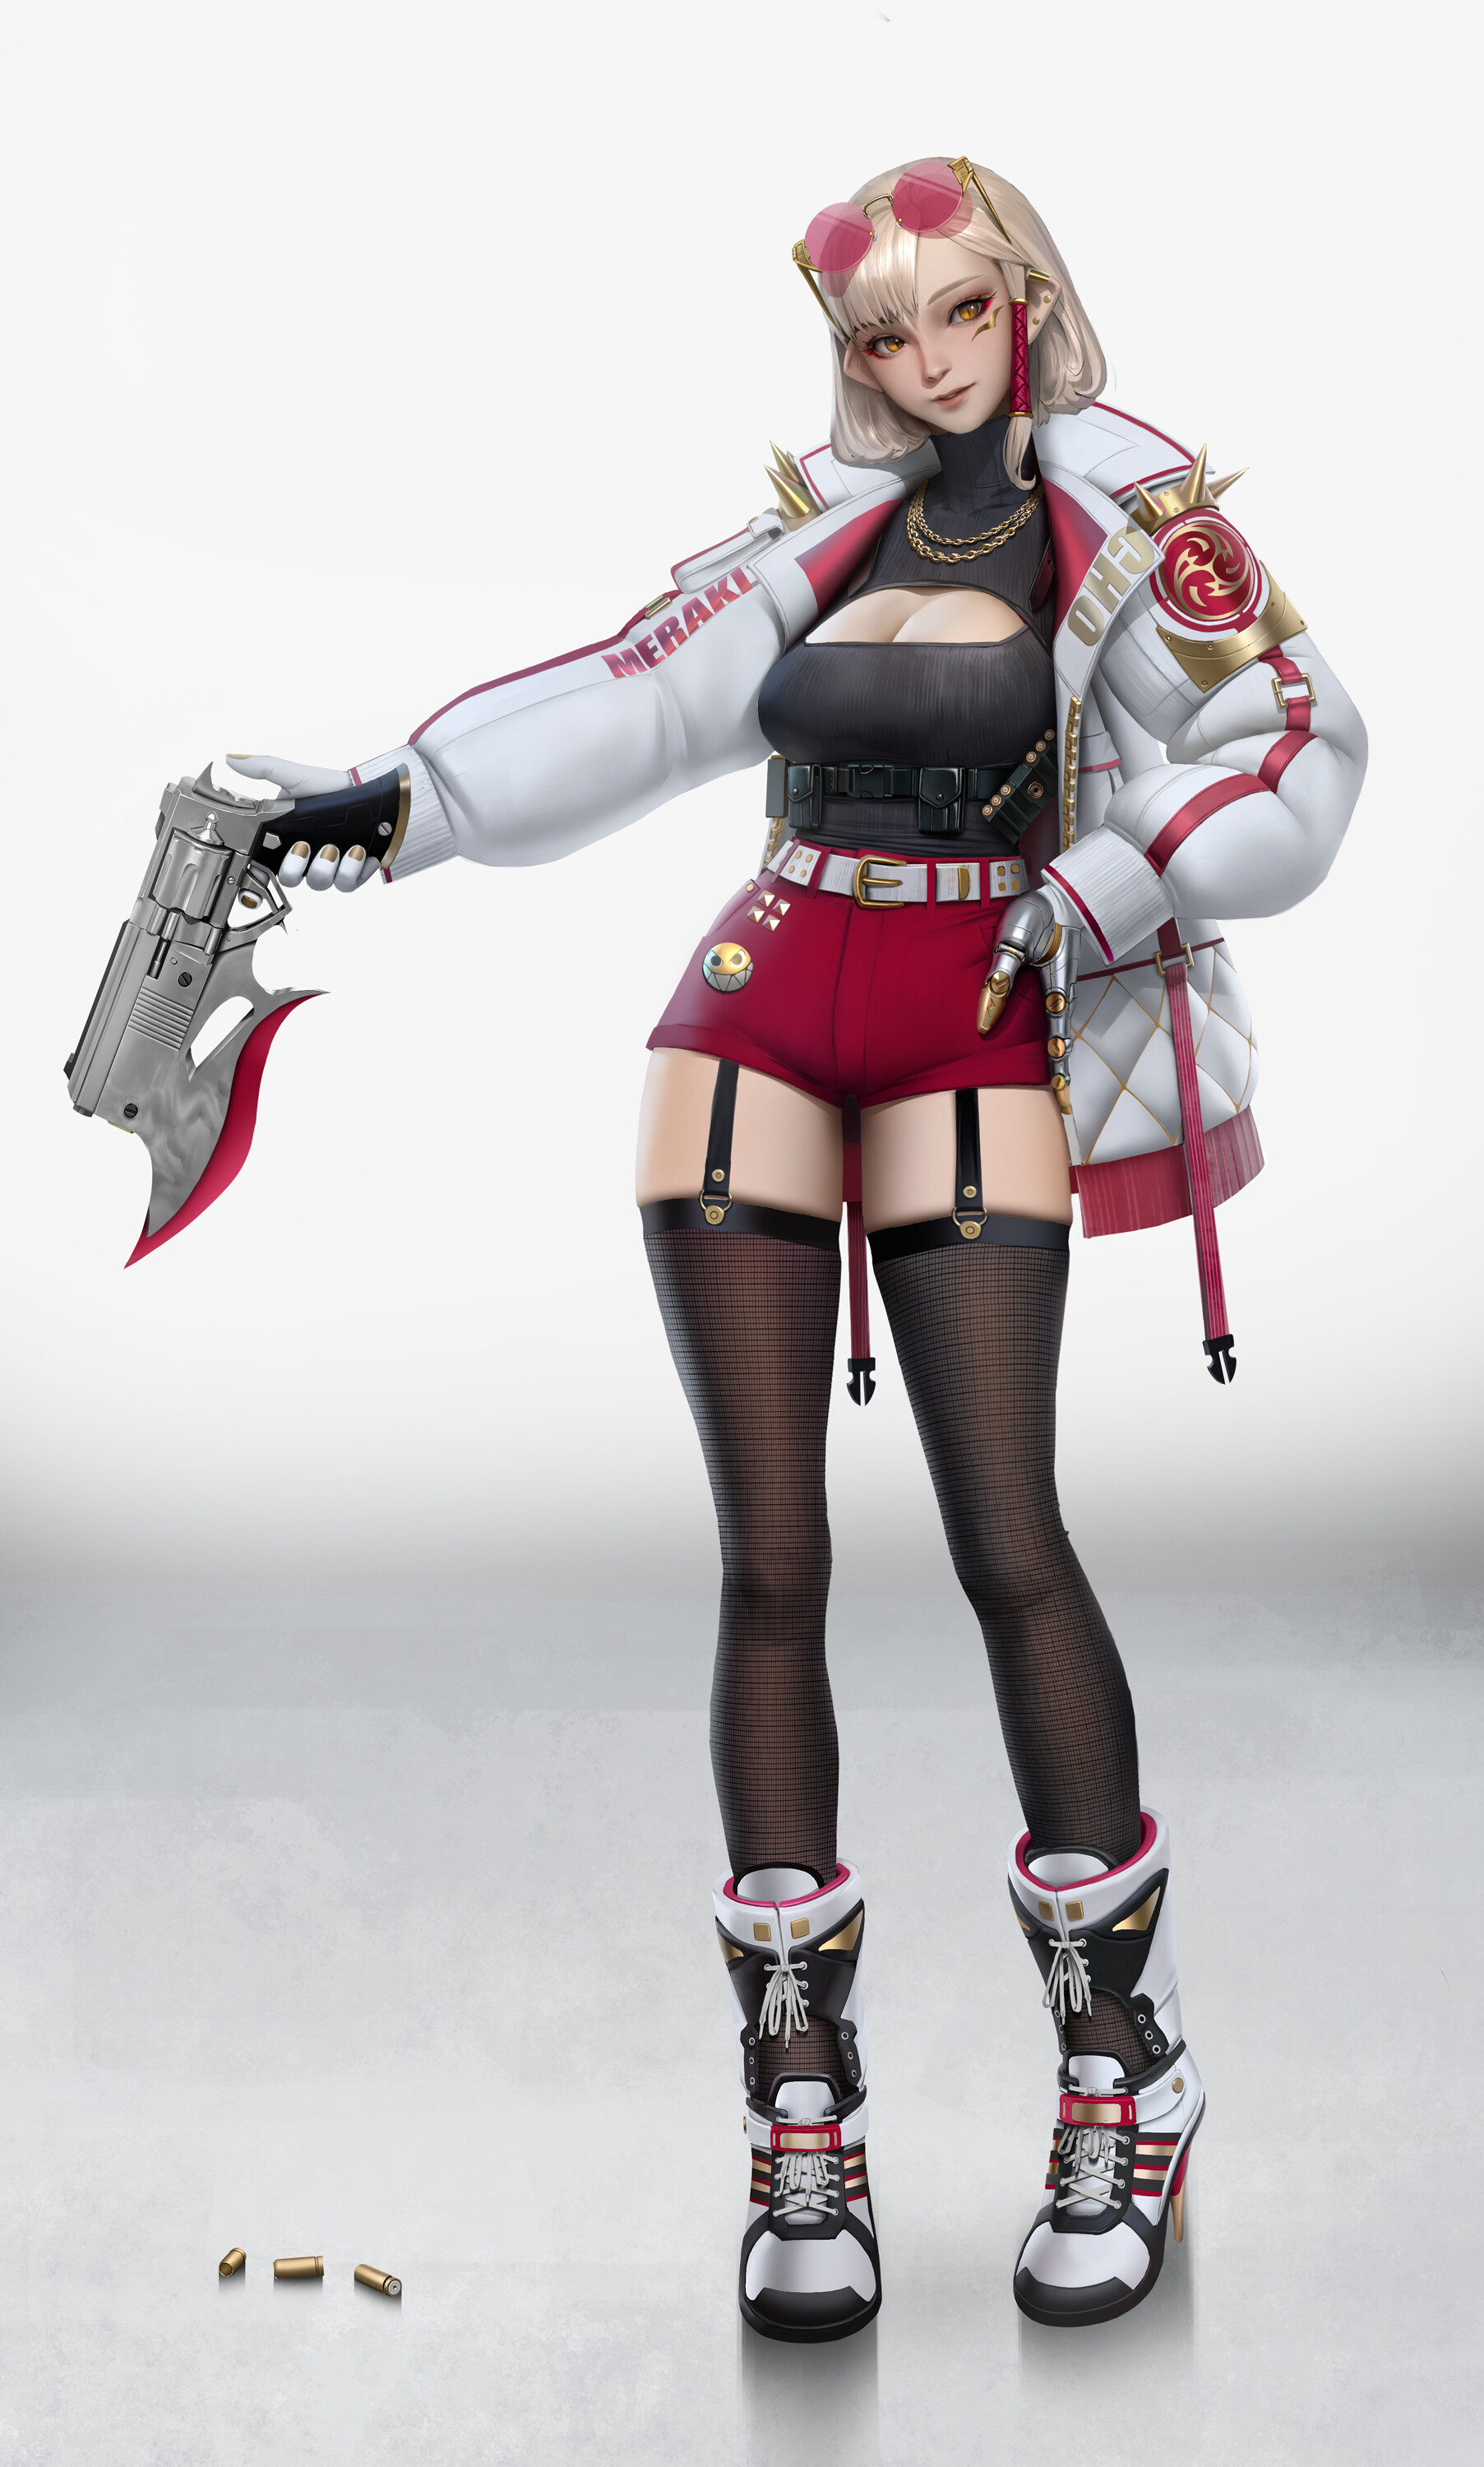 Anime 1805x3000 gyeong nam cho ArtStation standing women anime girls anime simple background white background girls with guns looking at viewer boots stockings boobs sunglasses gun weapon hands on hips short shorts garter straps